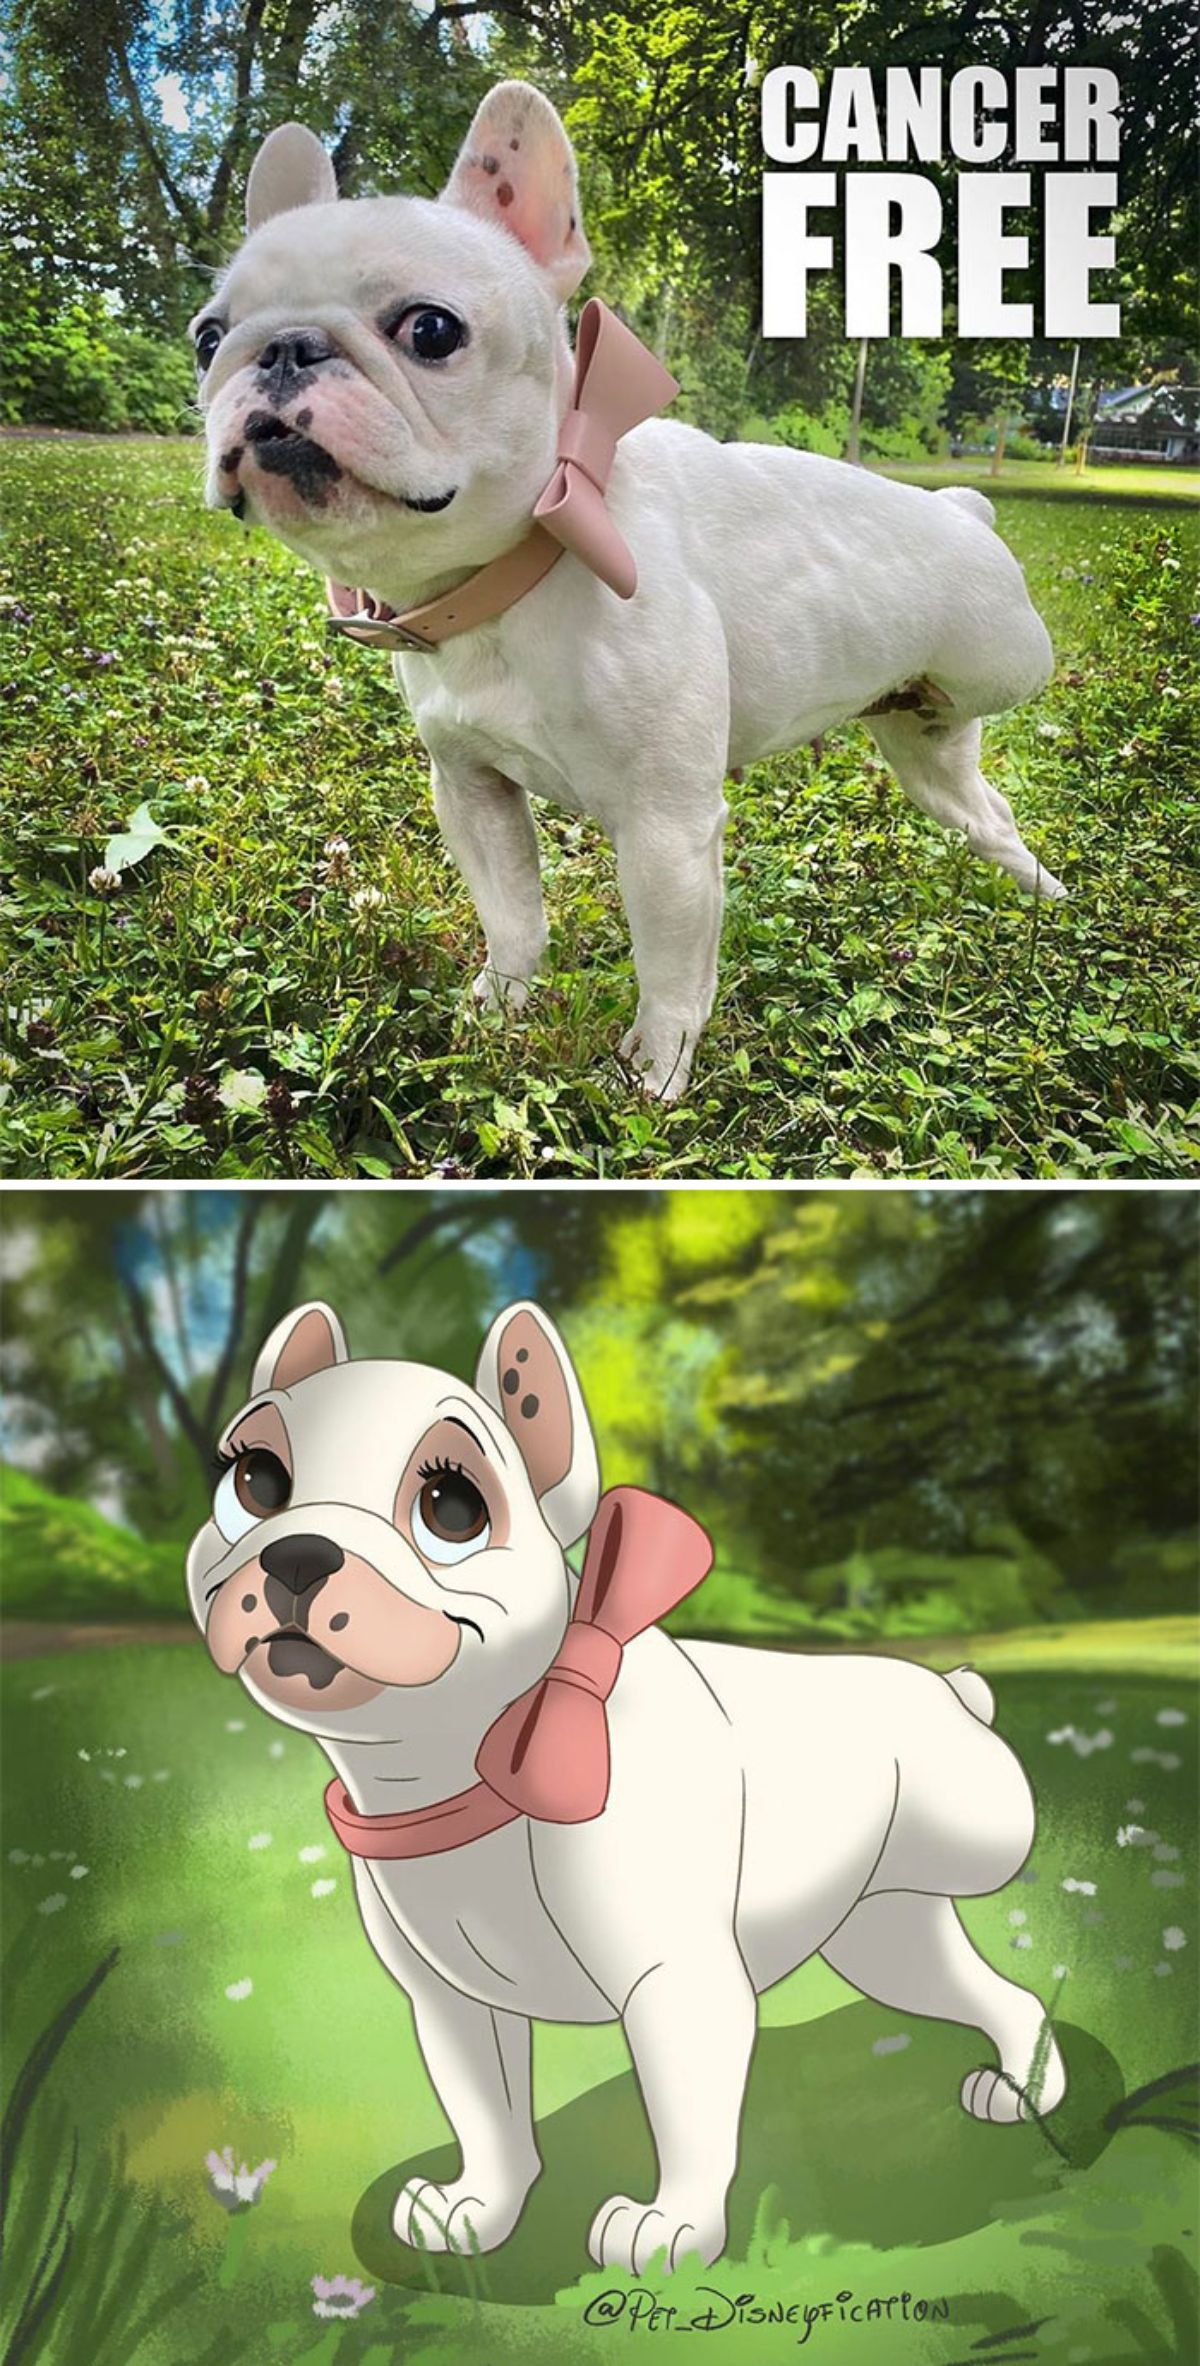 real photo and cartoon image of a white french bulldog with three legs standing in grass wearing a pink bow collar